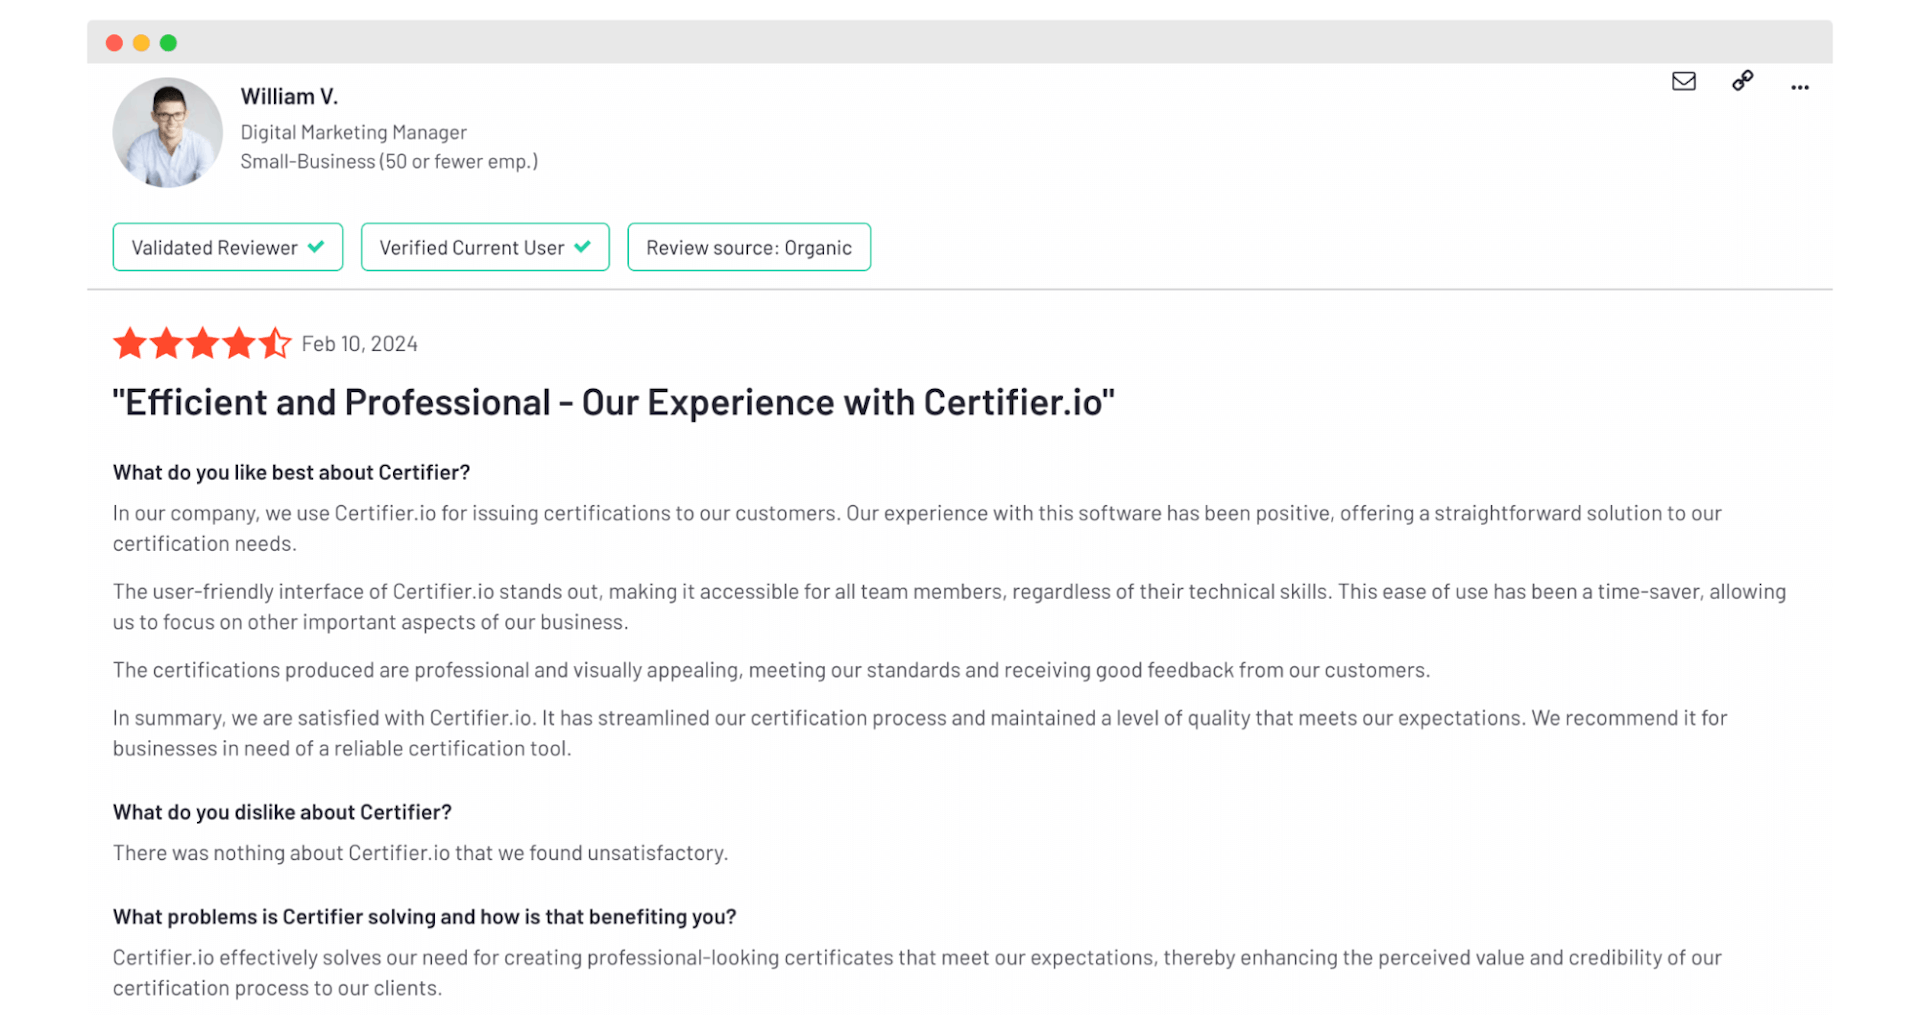 Certifier reviews about creating modern certificates.